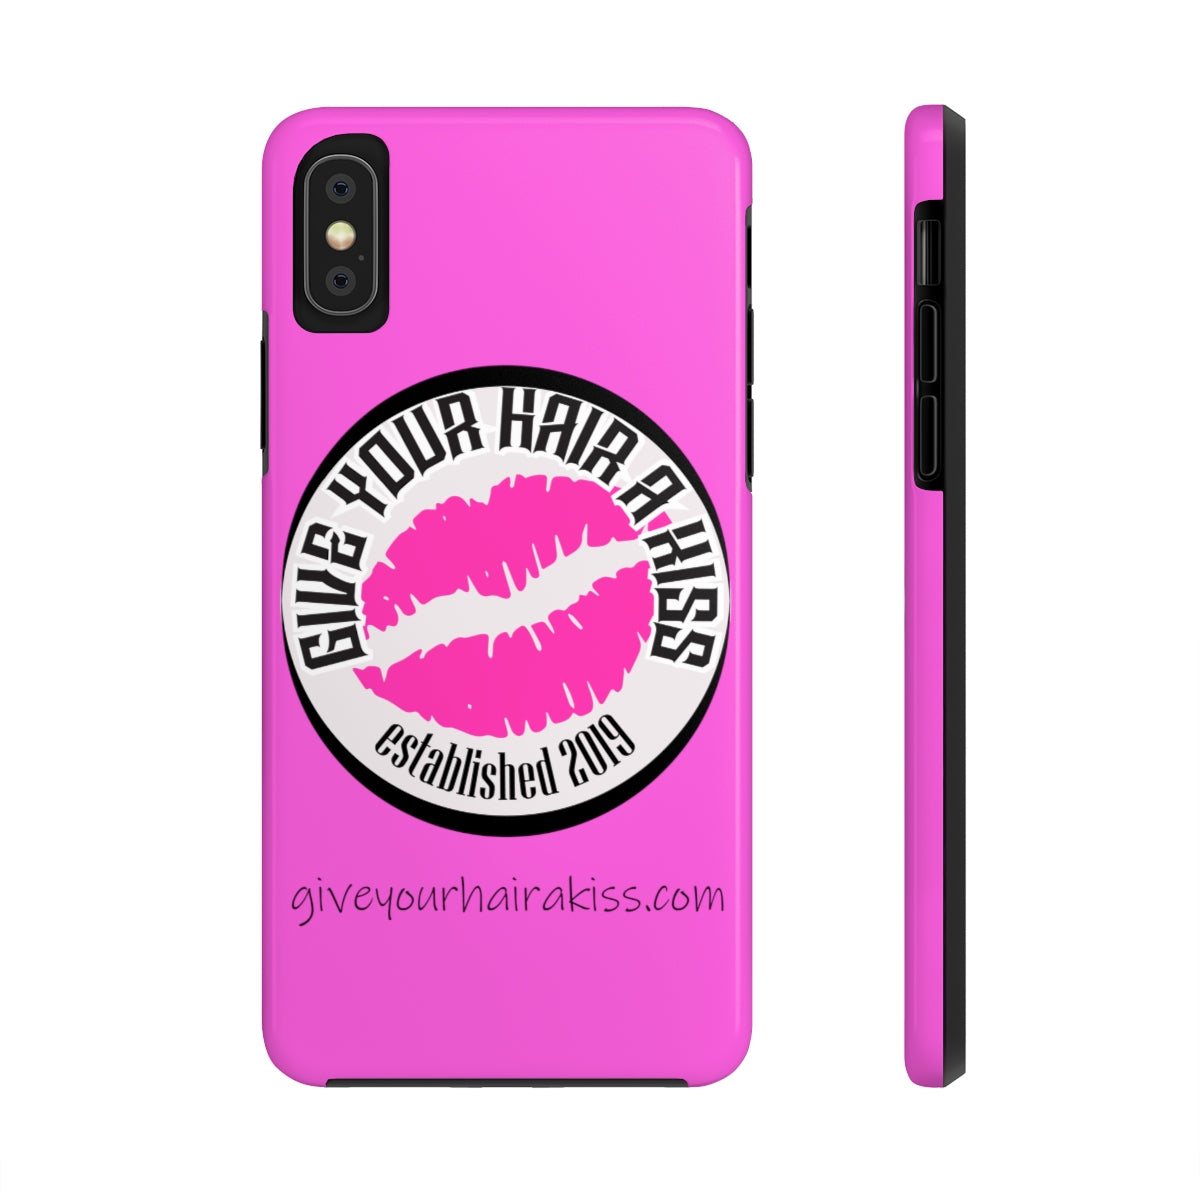 Case Mate Tough Phone Cases - Give Your Hair a Kiss